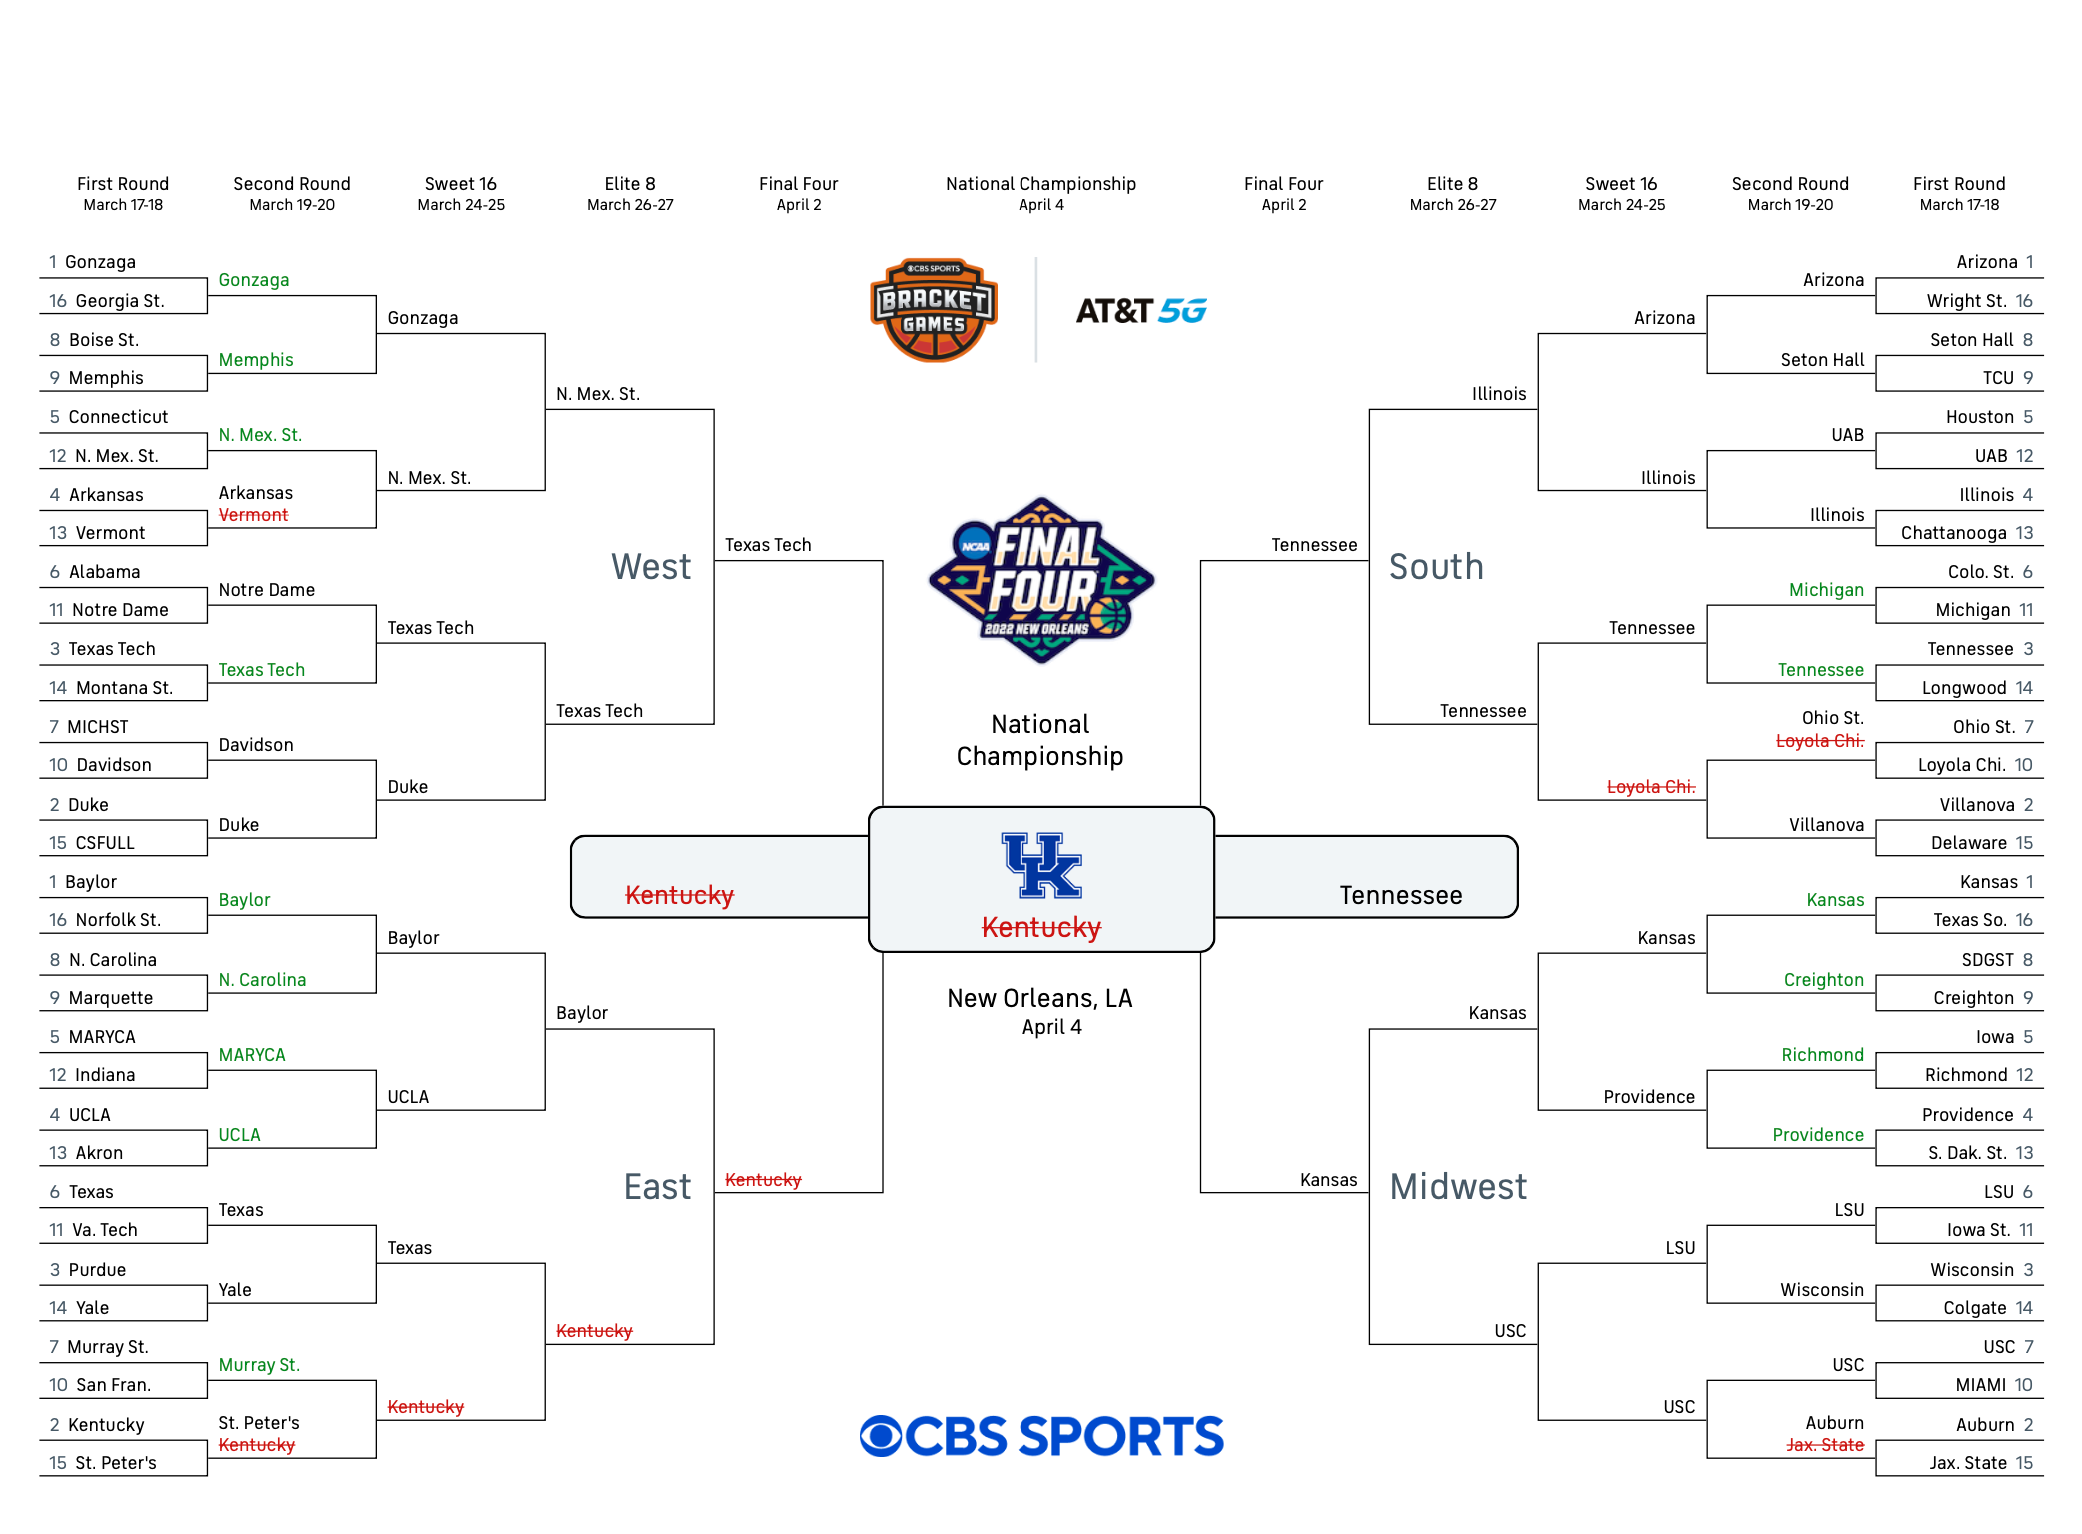 A busted bracket for the 2022 March Madness tournament